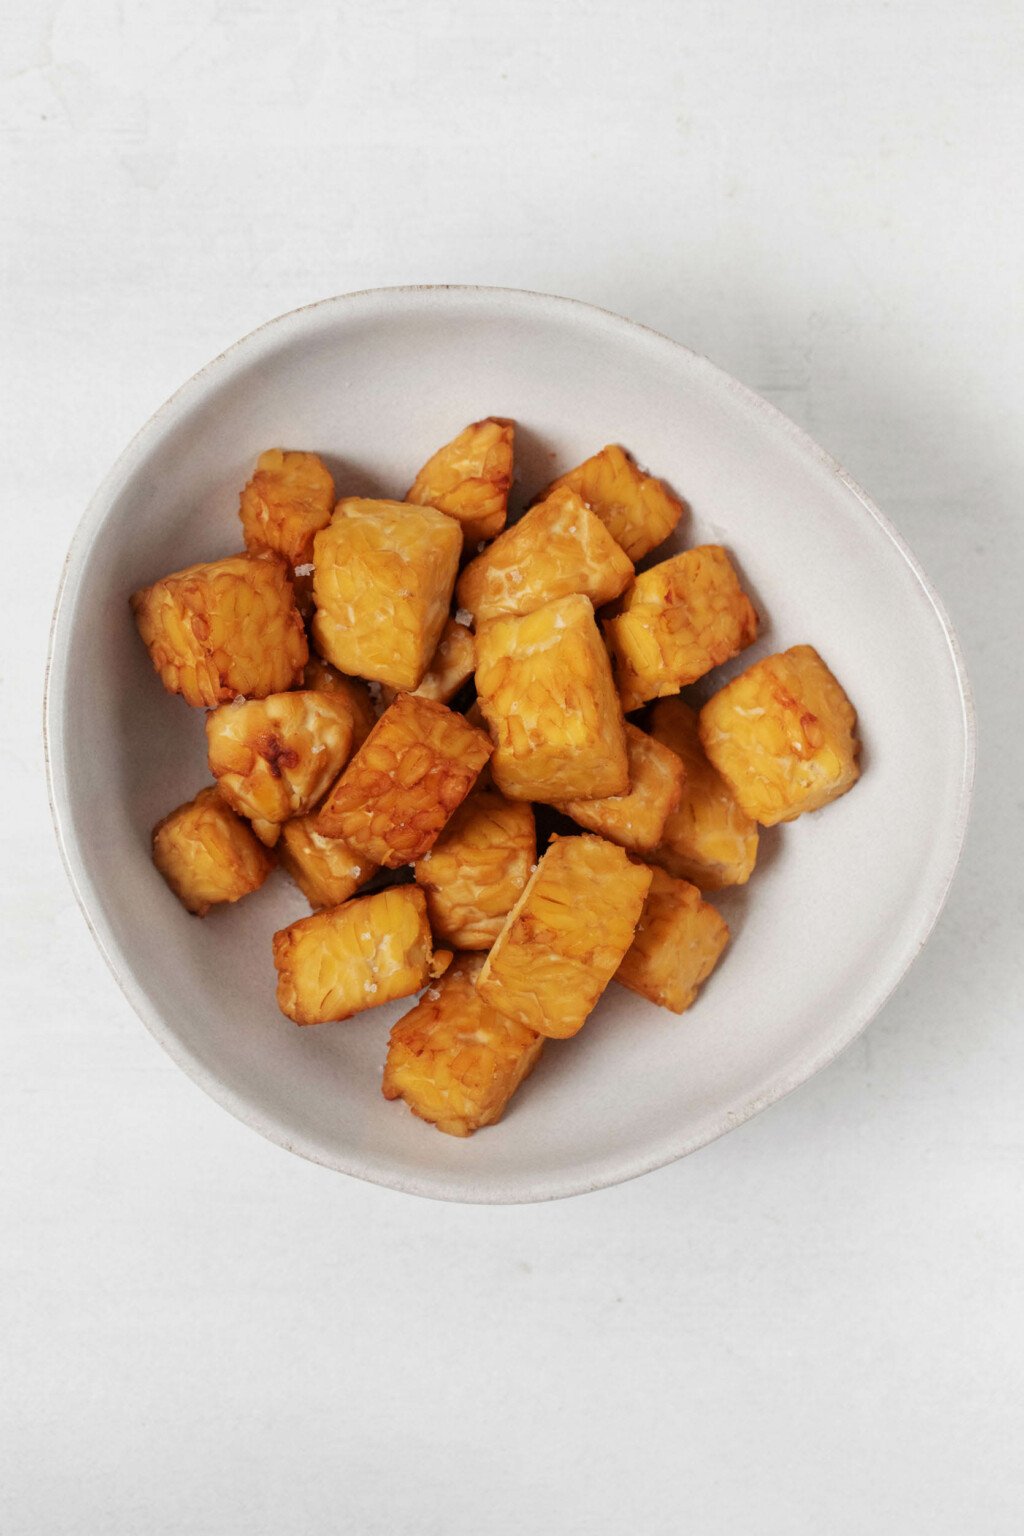 An asymmetrical, ceramic bowl holds brown tempeh "Nuggets" It is located on a white surface.